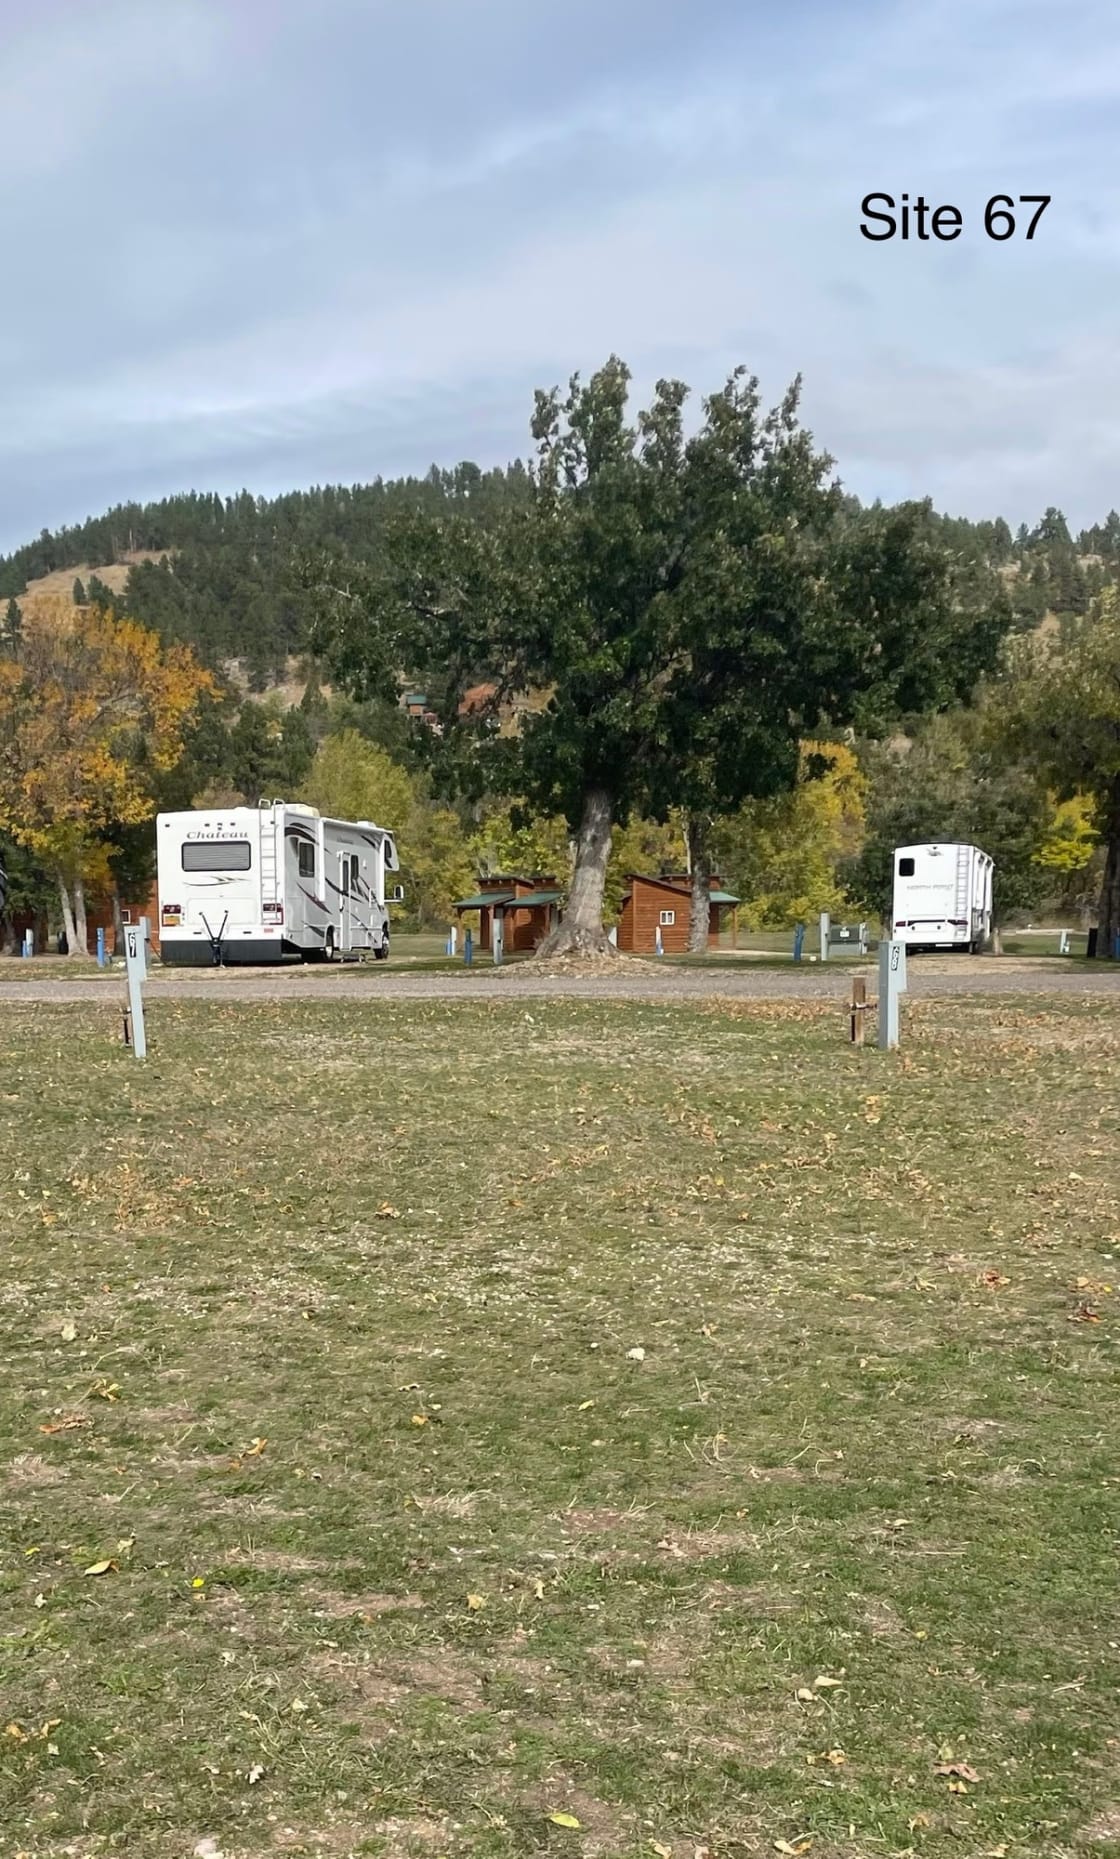 Day's End Campground